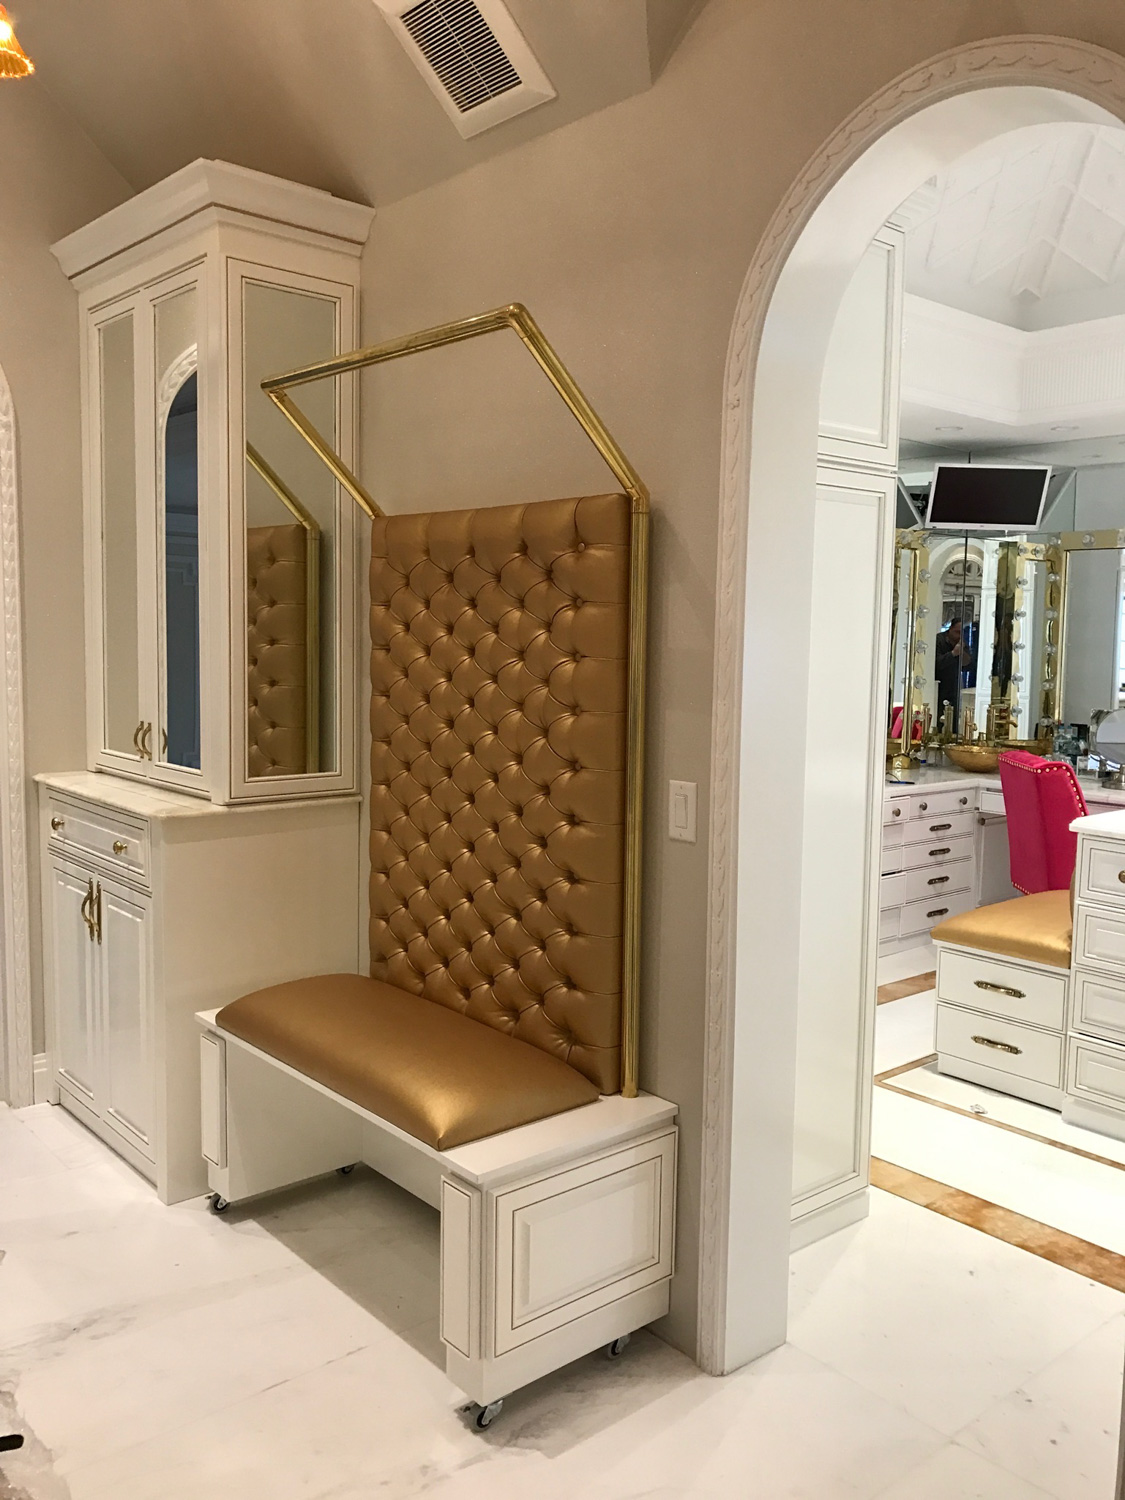 Elegant white vanity with gold accents and Custom Upholstered Tufted Bench.